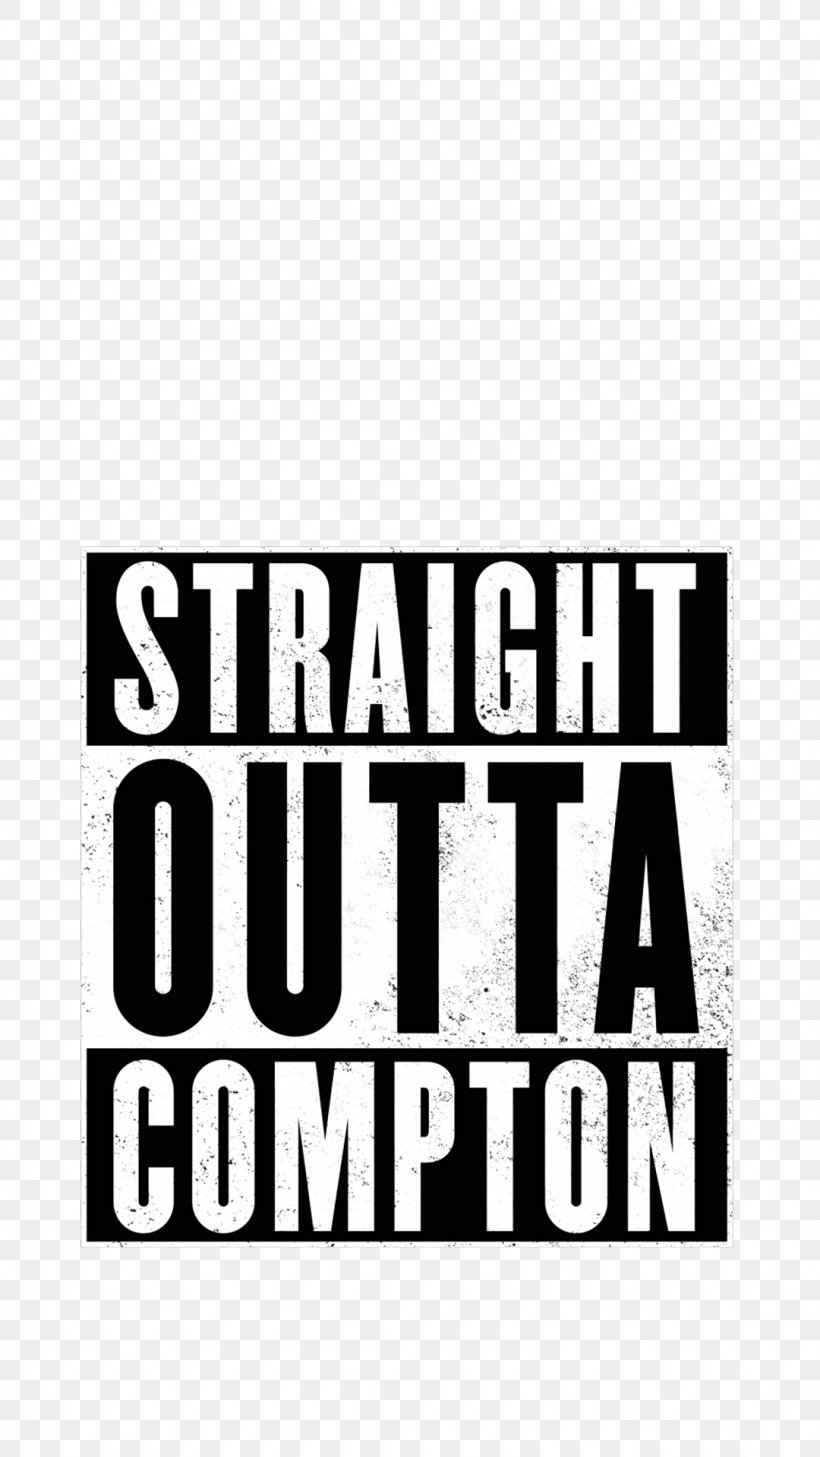 Download Straight Outta Compton N.W.A. Gangsta Rap Hip Hop, PNG ...